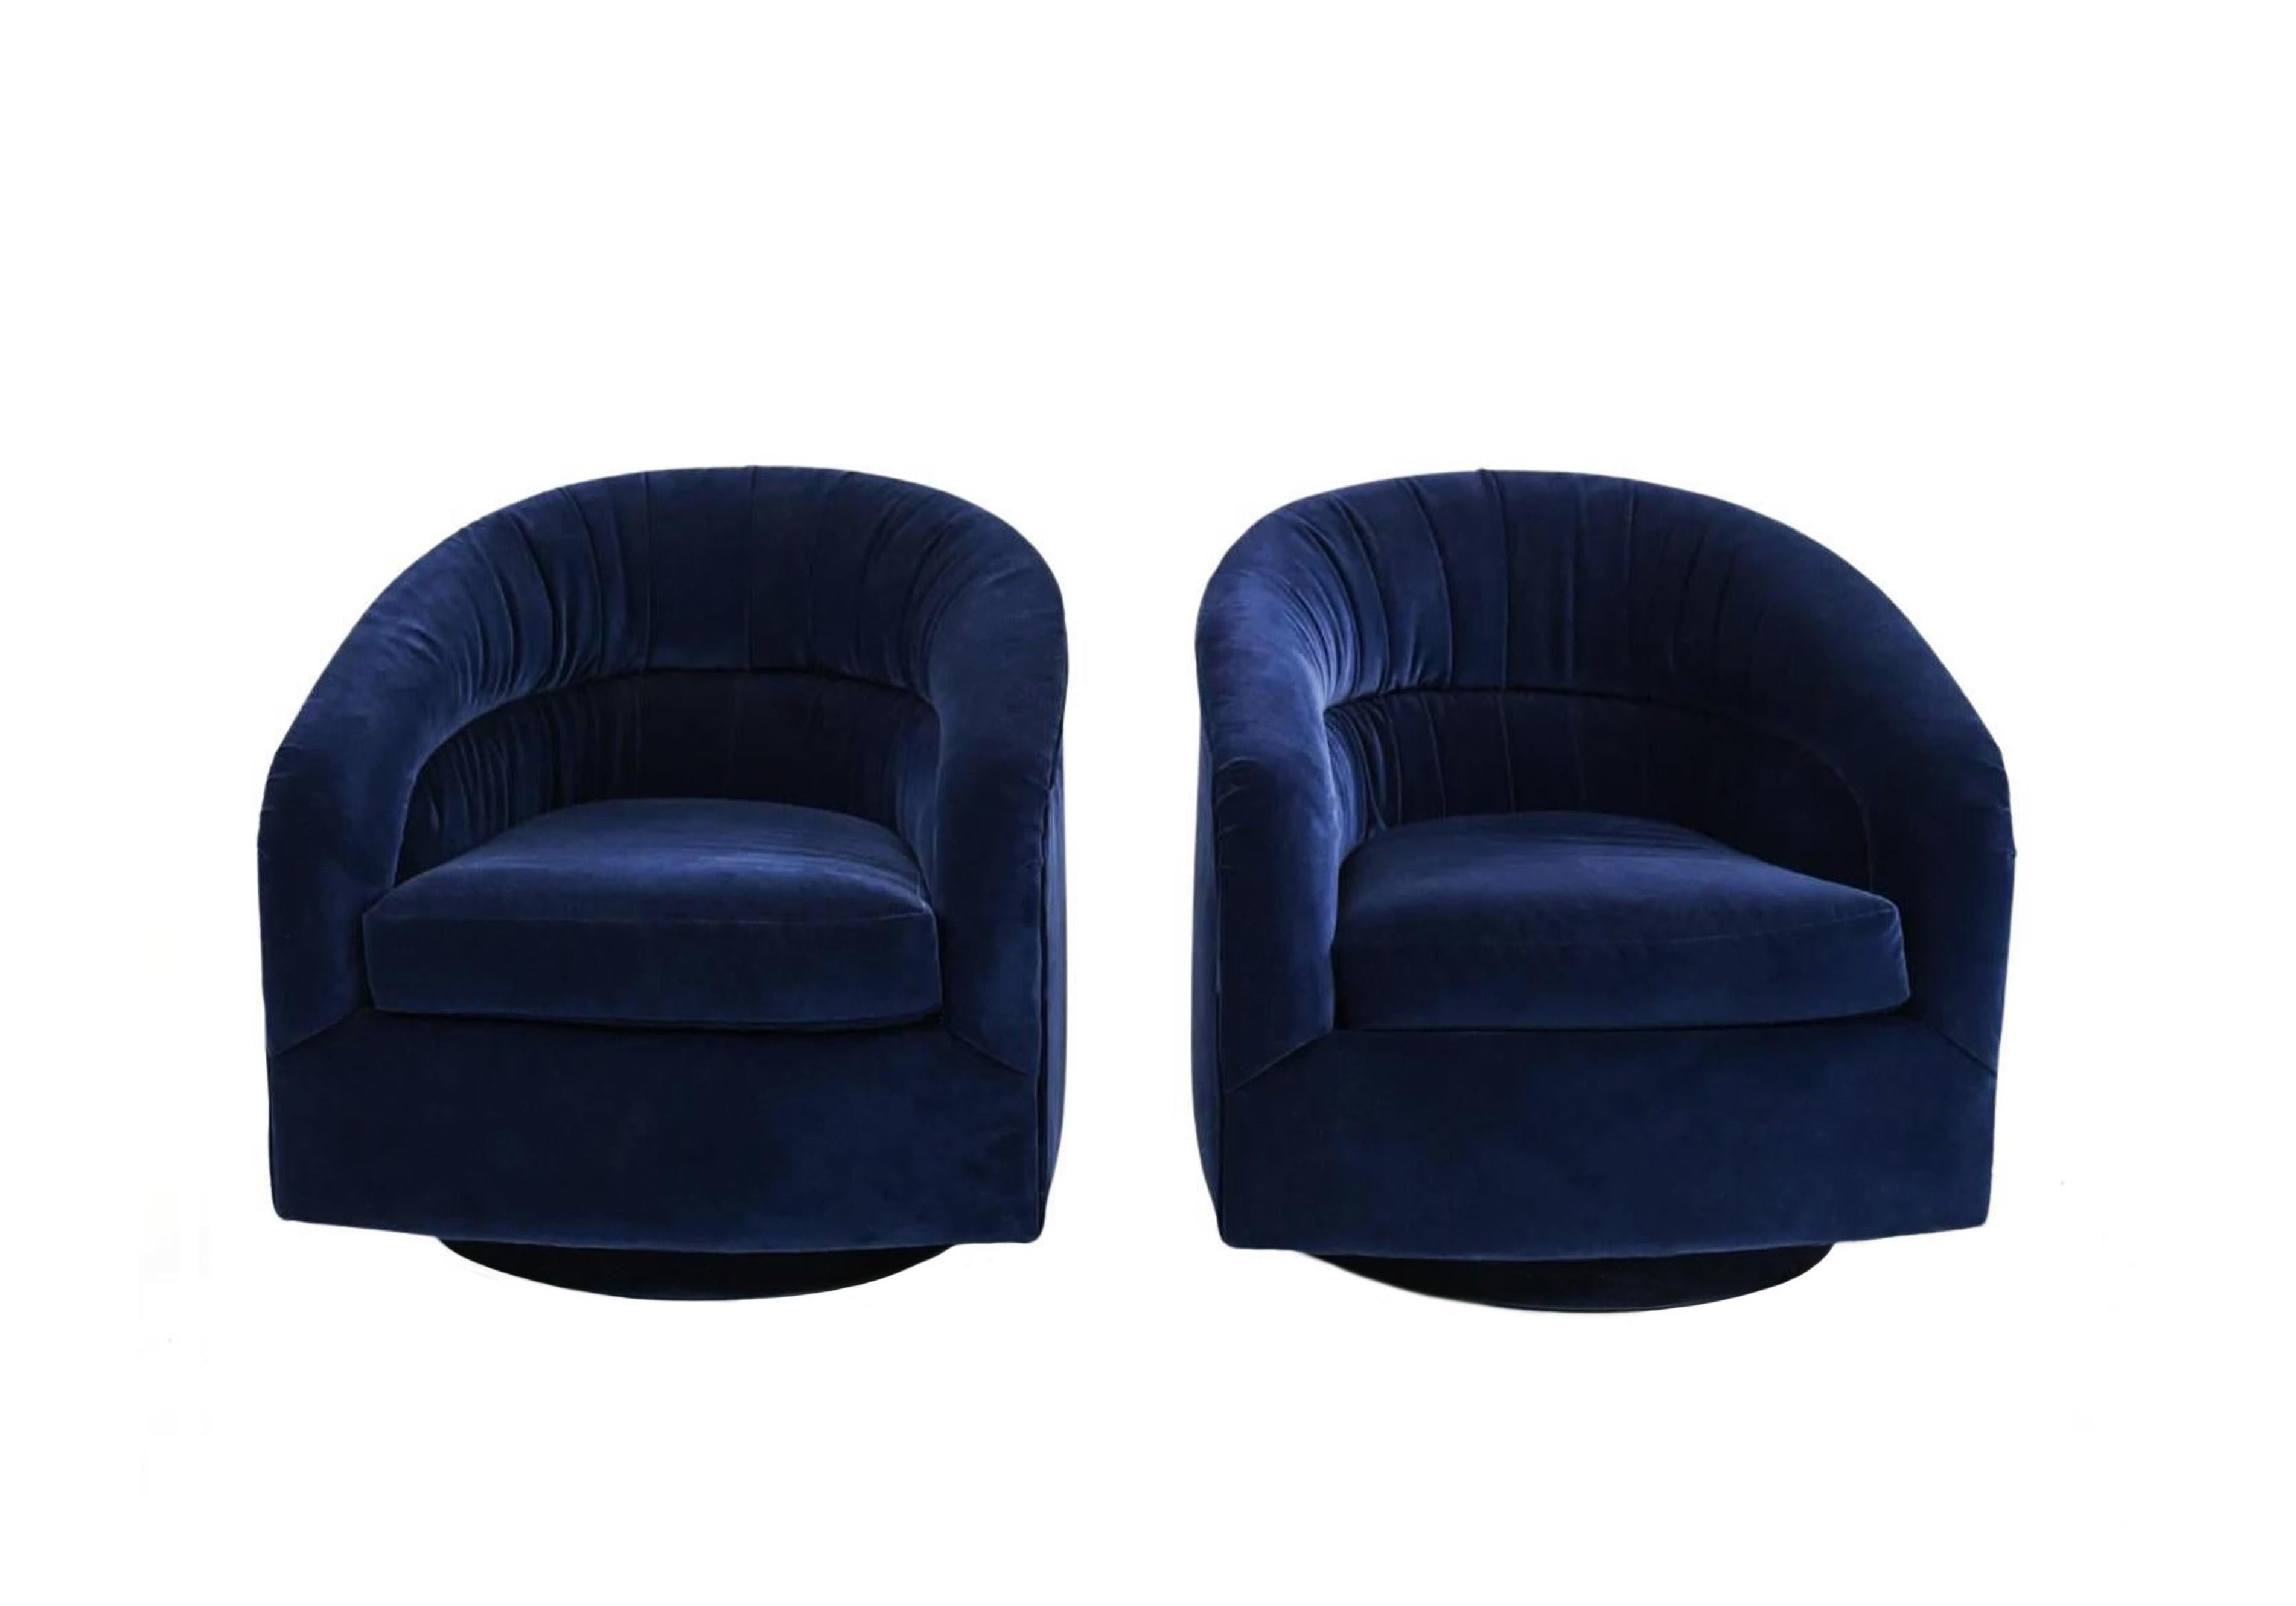 Late 20th Century Pair Blue Swiveling Ruched Barrel-Back Lounge Chairs For Sale